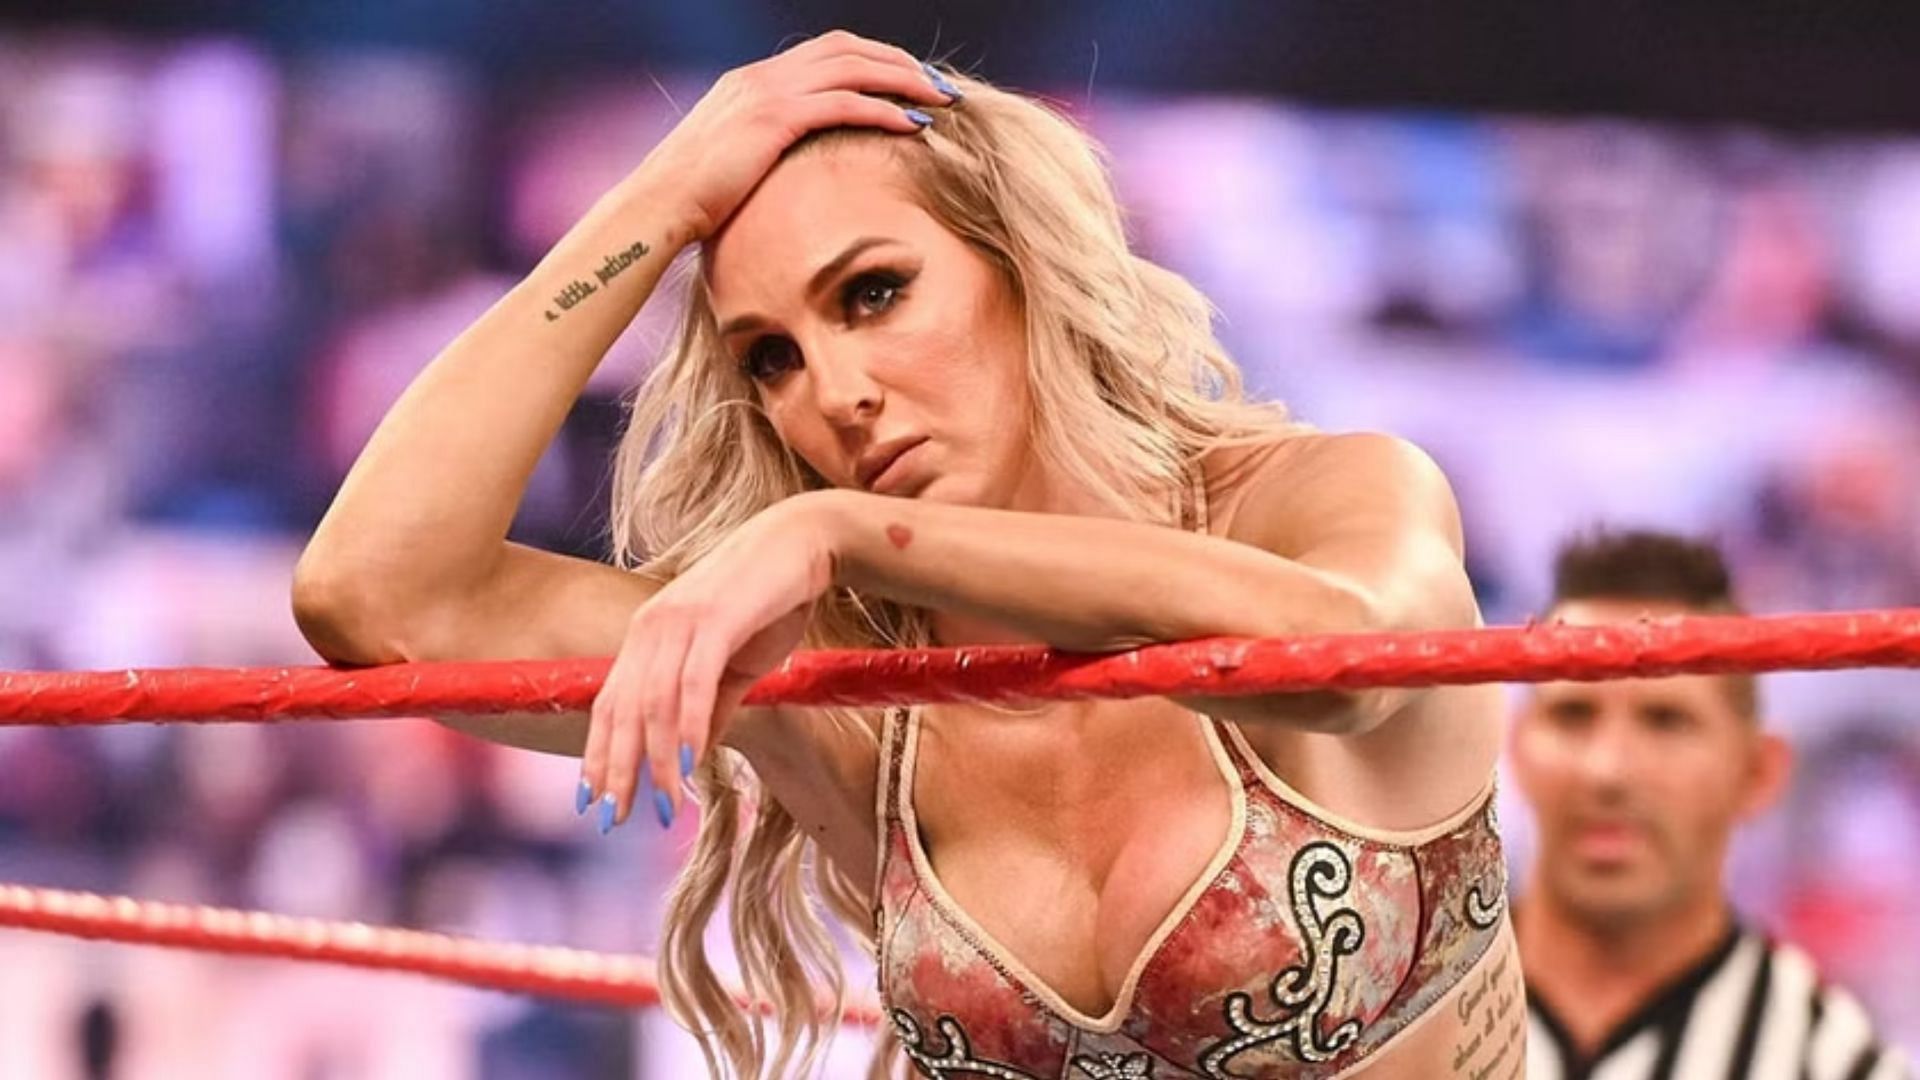 Charlotte Flair has not had the best luck recently